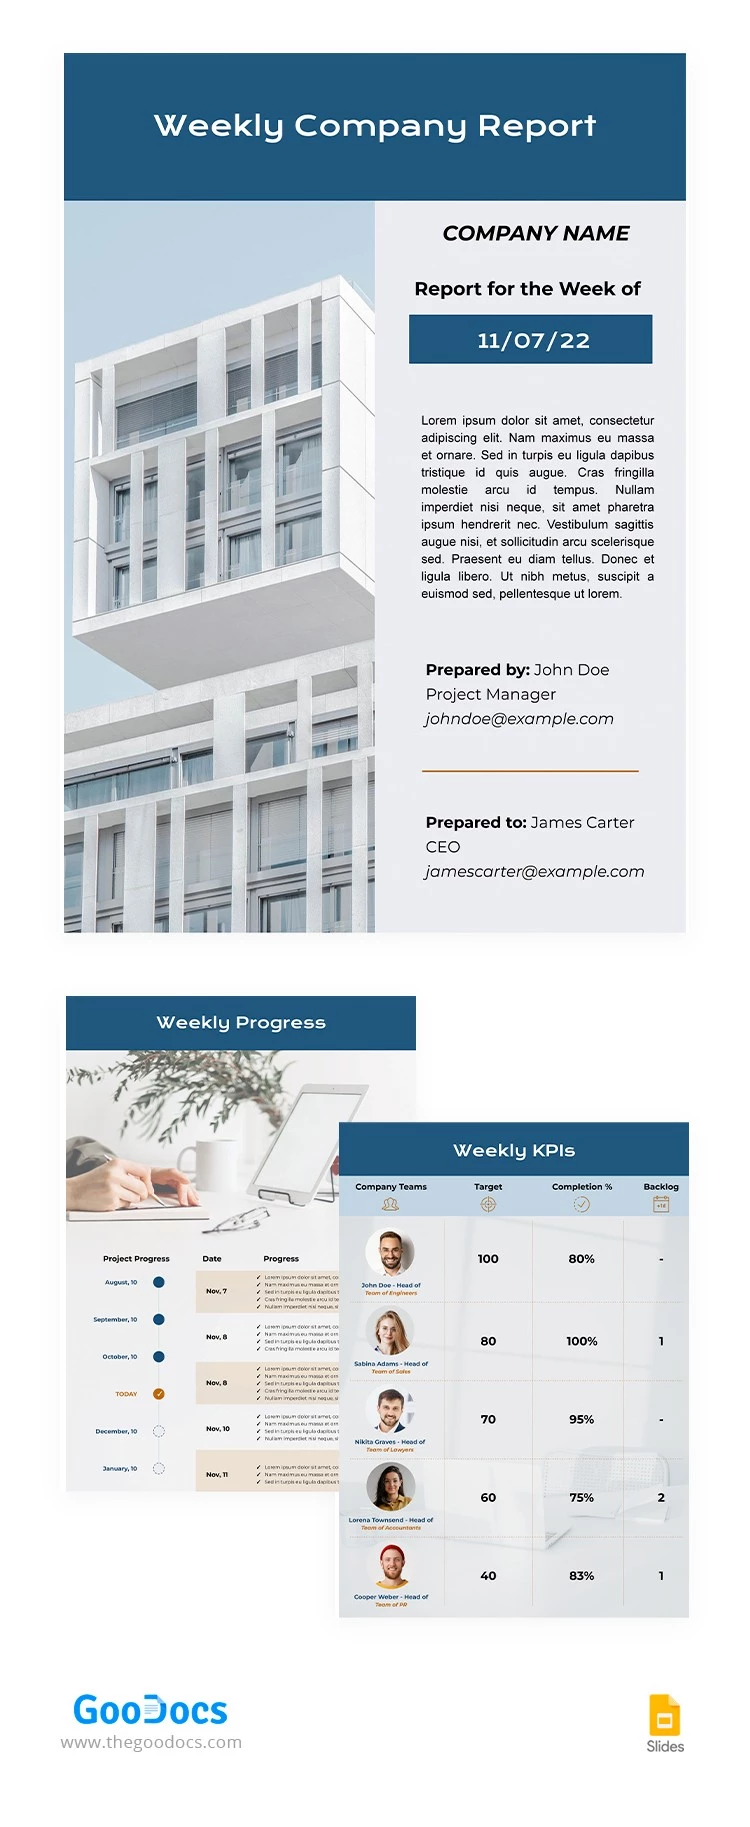 Weekly Company Report - free Google Docs Template - 10064943